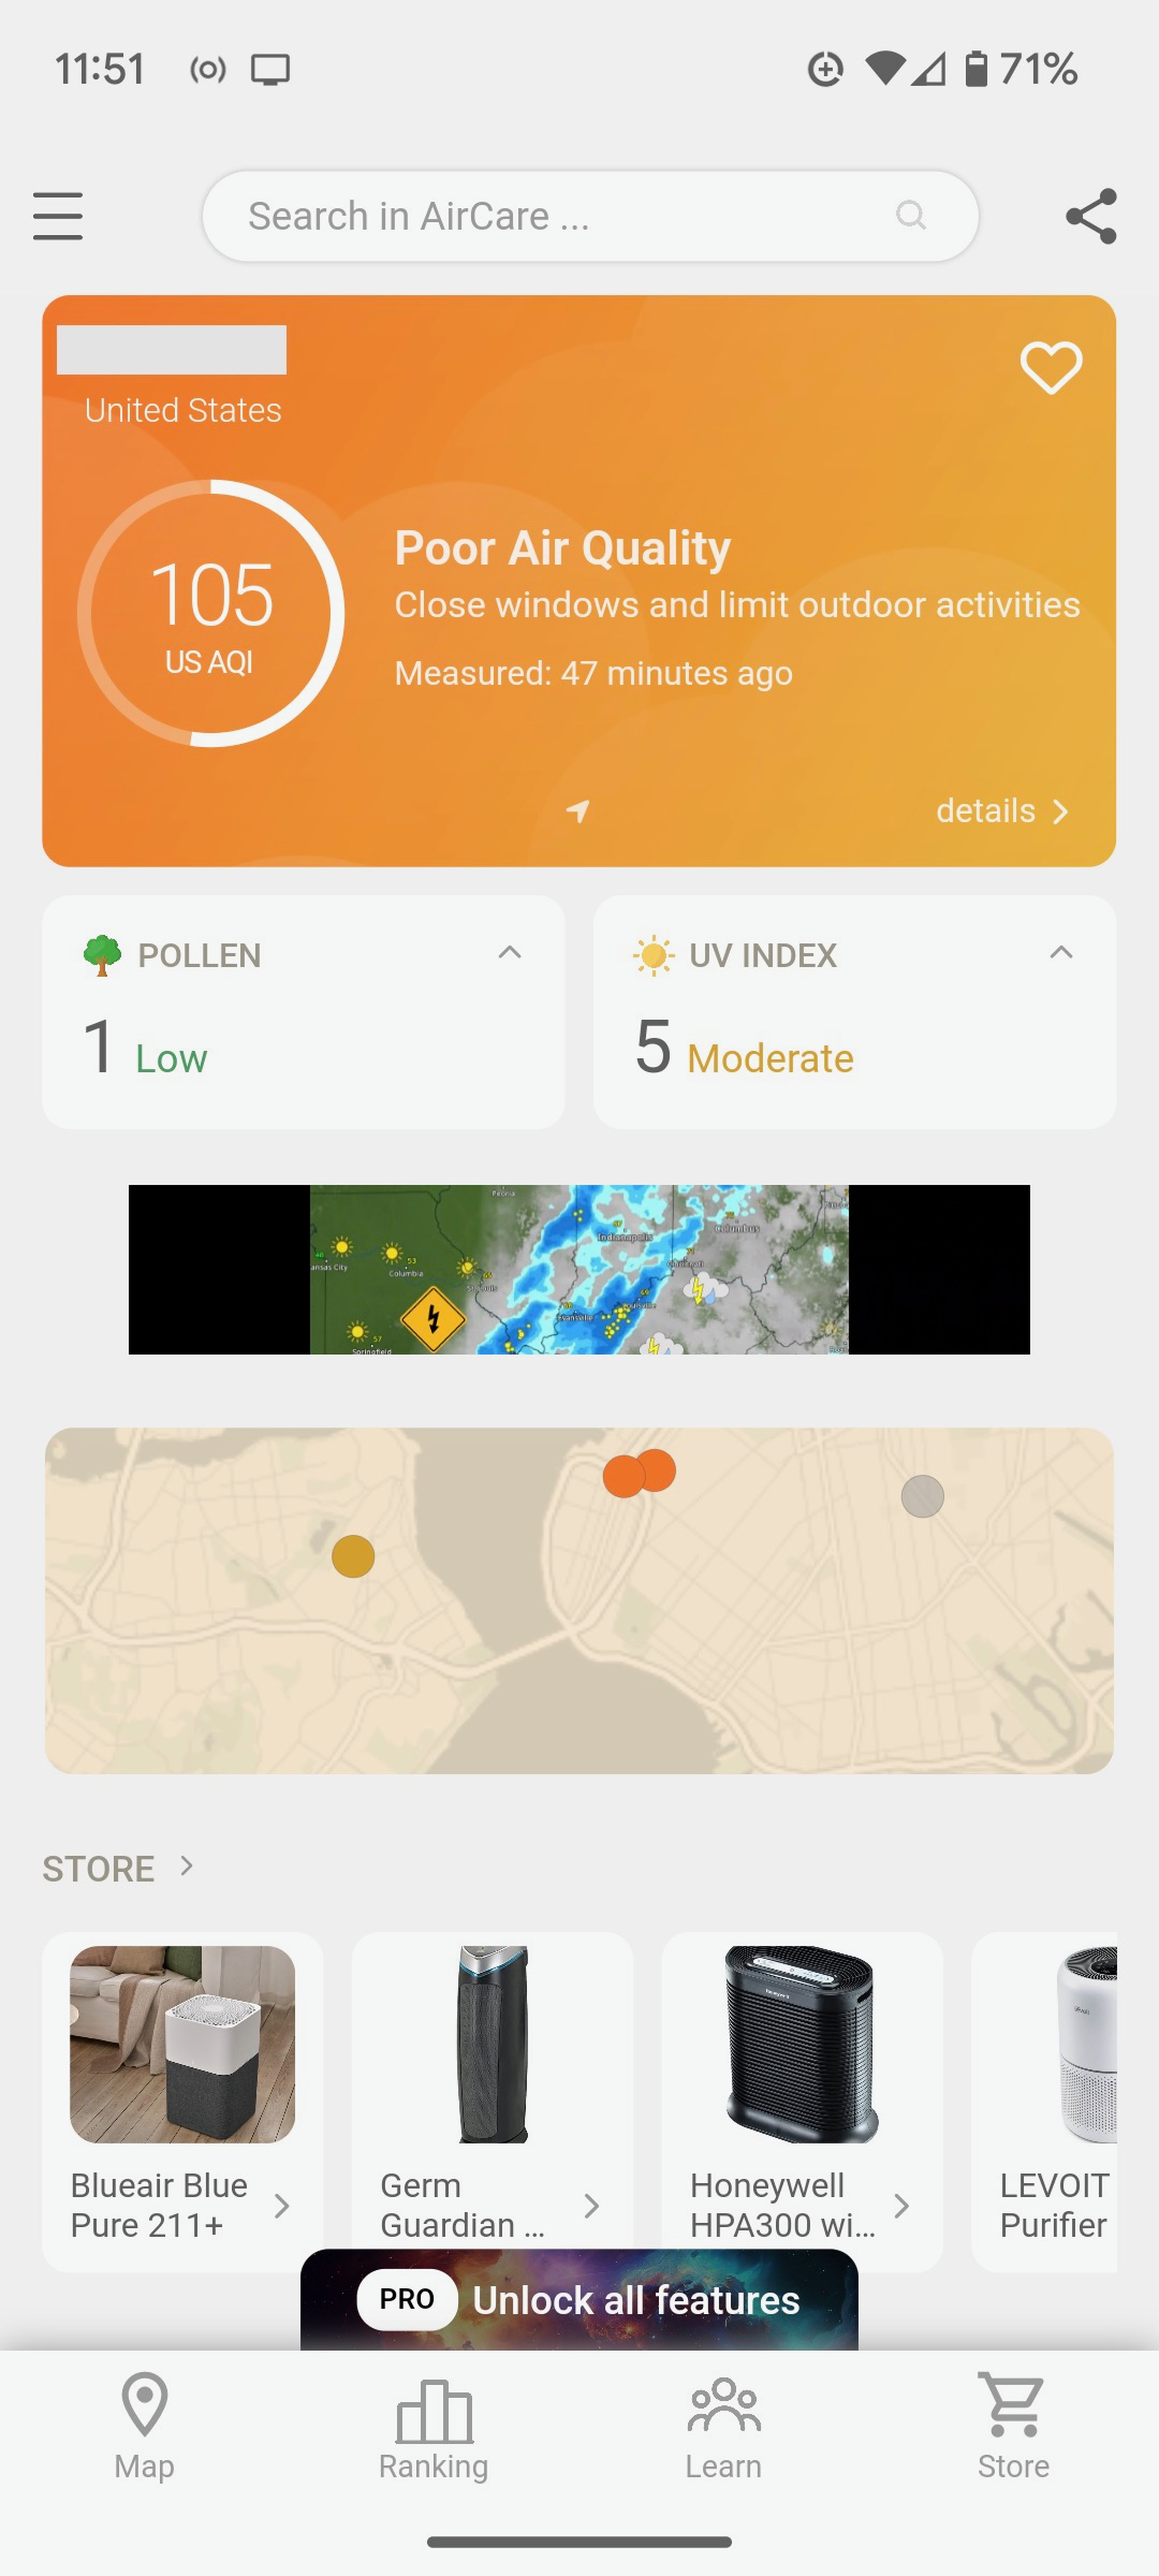 Large orange rectangle that says “Poor air quality” above pollen and UV index numbers, above a small map and ads for various air purifiers.